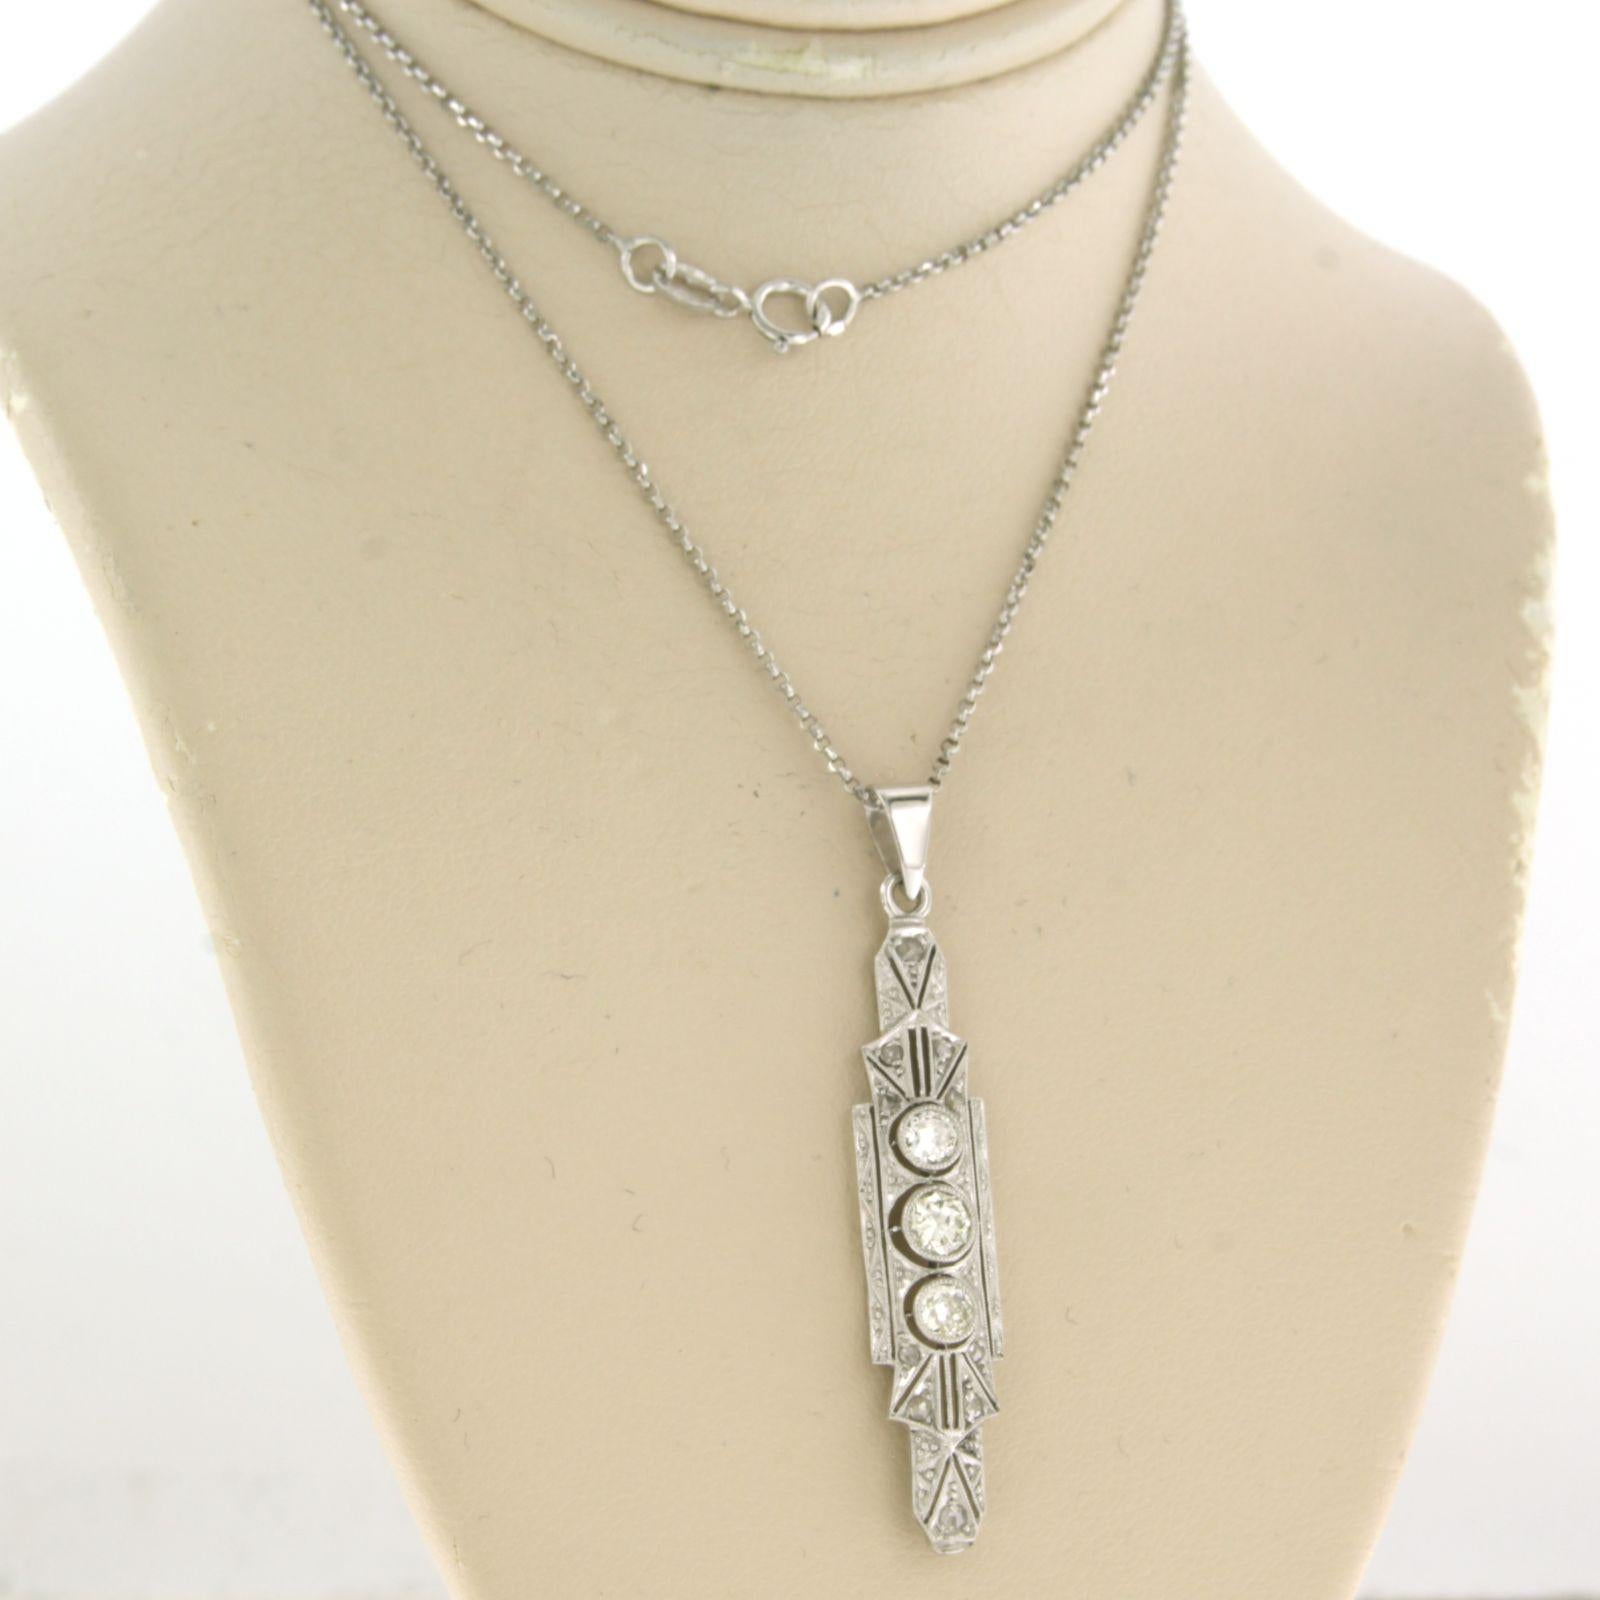 18k white gold necklace with pendant set with old mine cut and rose cut diamonds total approx.  0.50ct - F/G - SI/P - 42cm

Detailed description

the length of the necklace is 42 cm long by 0.7 mm wide

Dimensions of the pendant are 3.9 cm high by 8